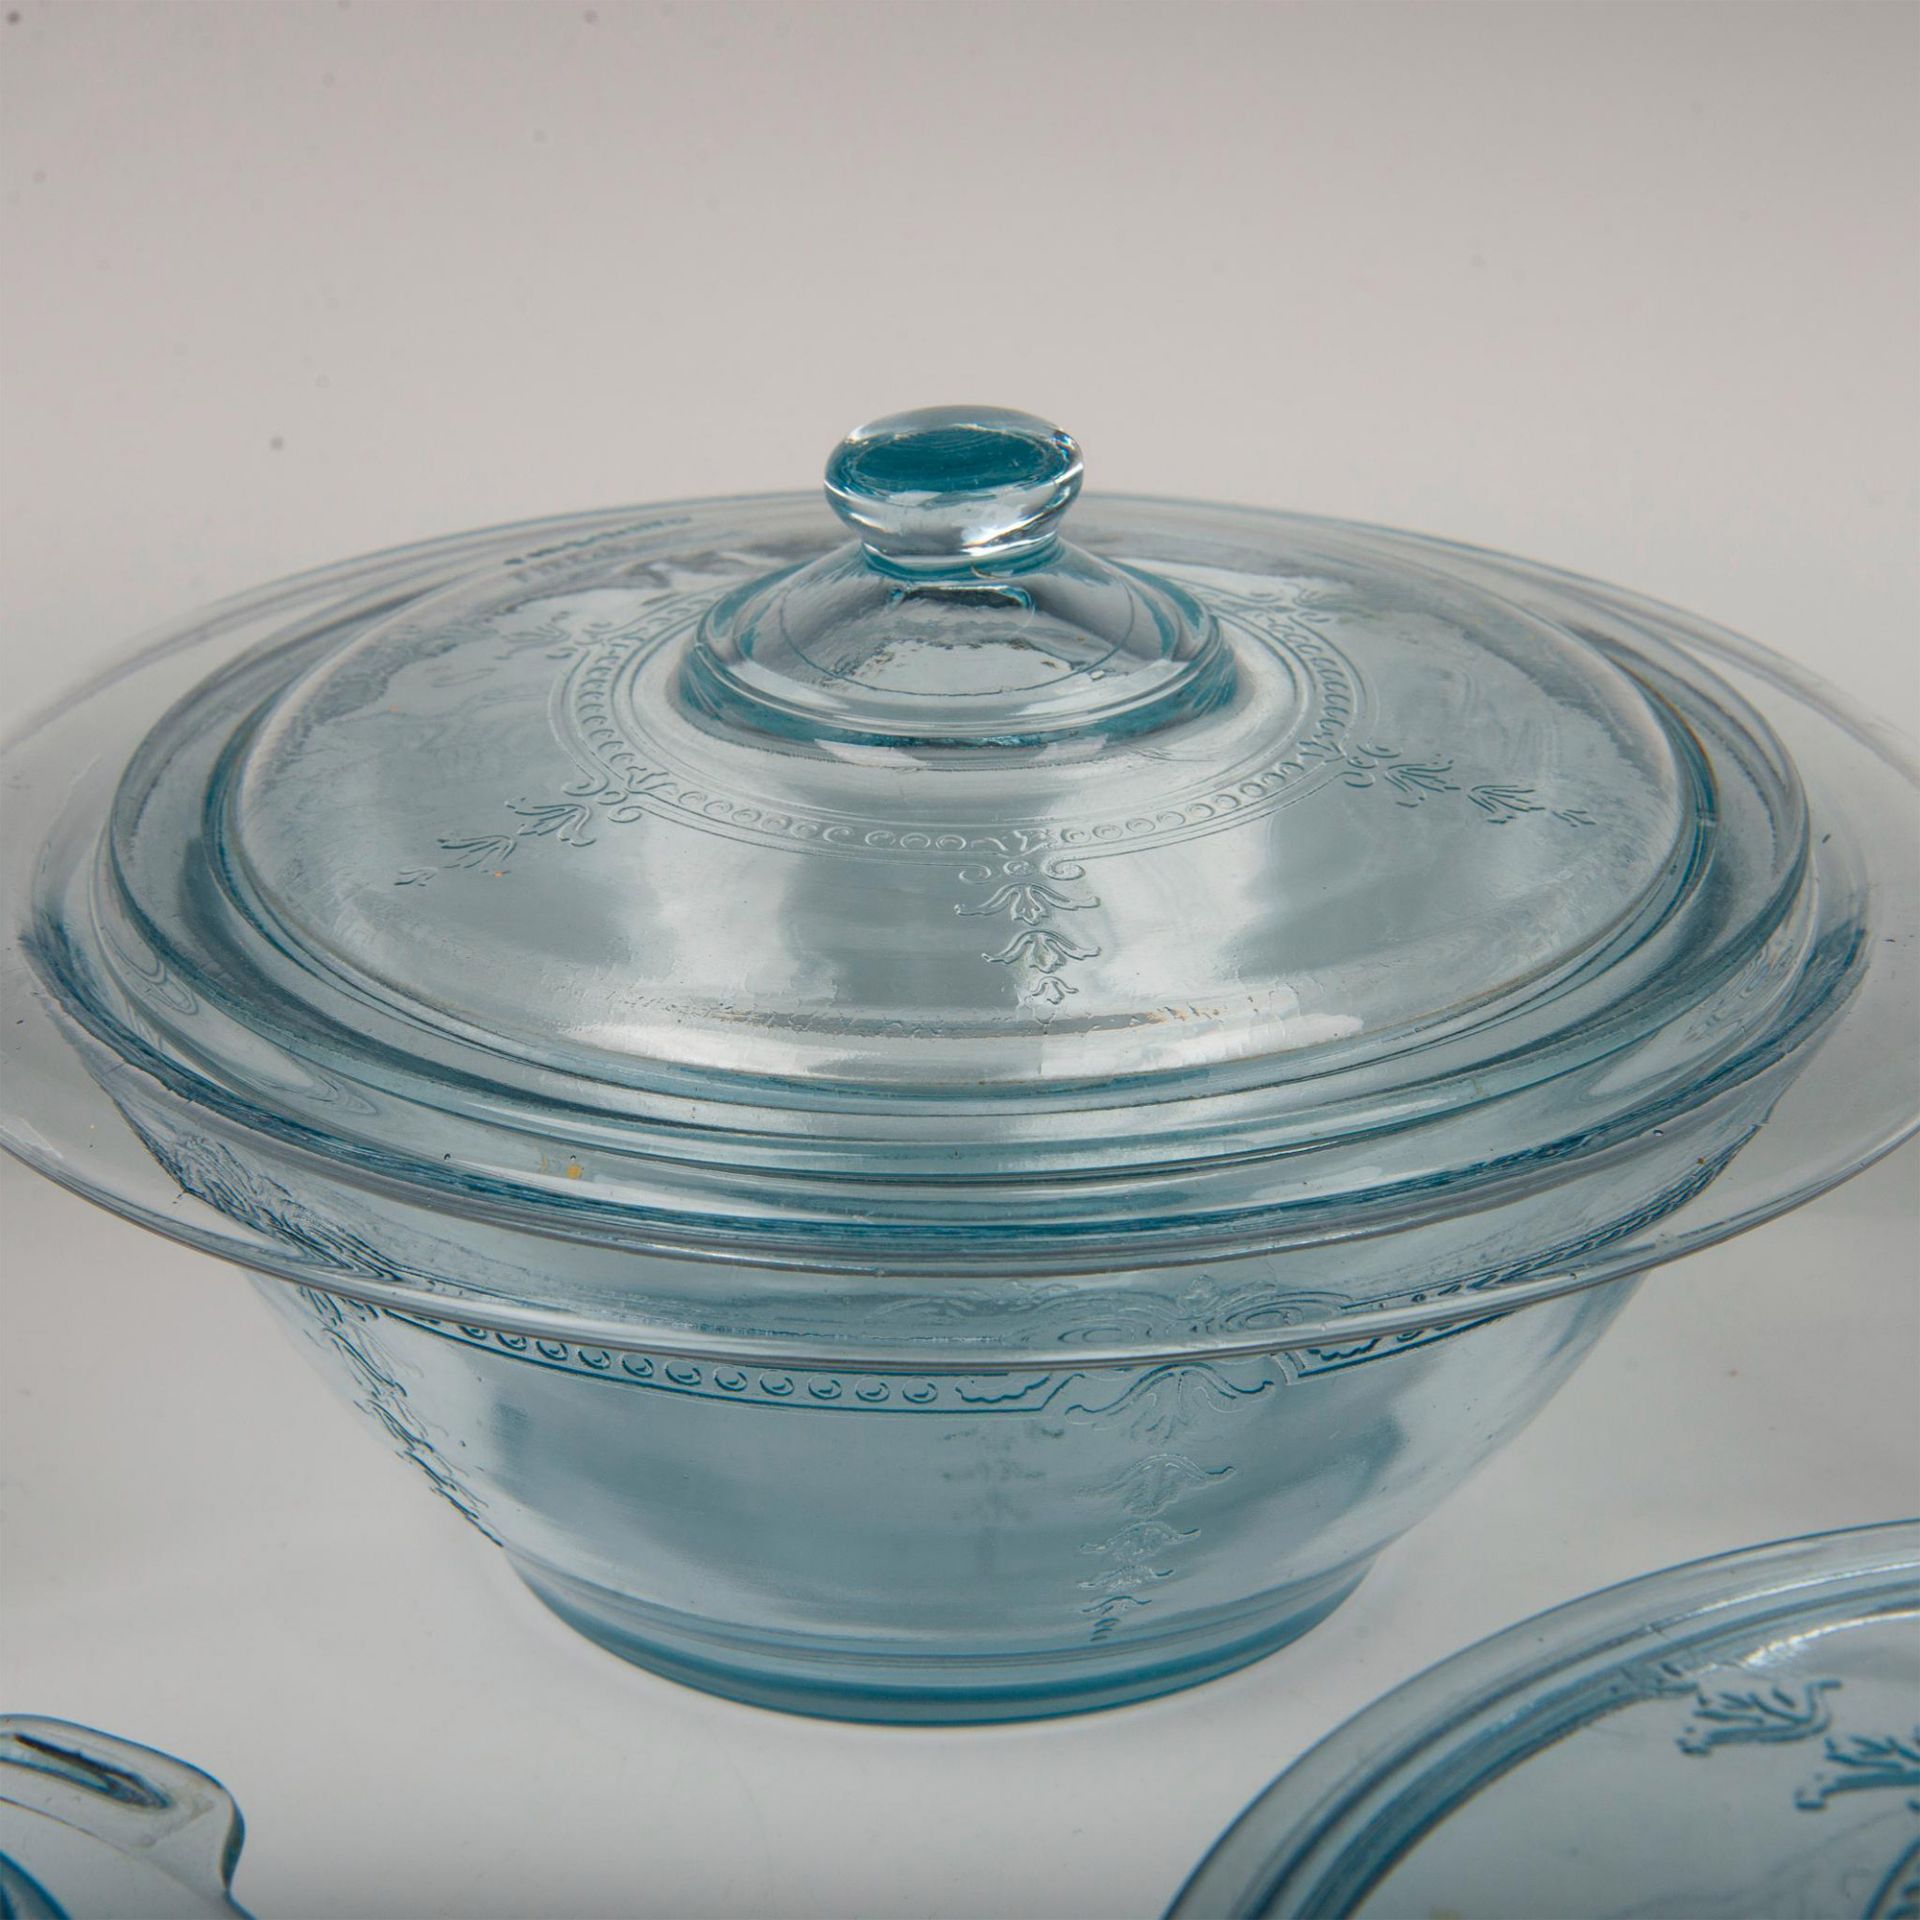 16pc Anchor Hocking Glass Kitchenware, Philbe Sapphire - Image 5 of 8